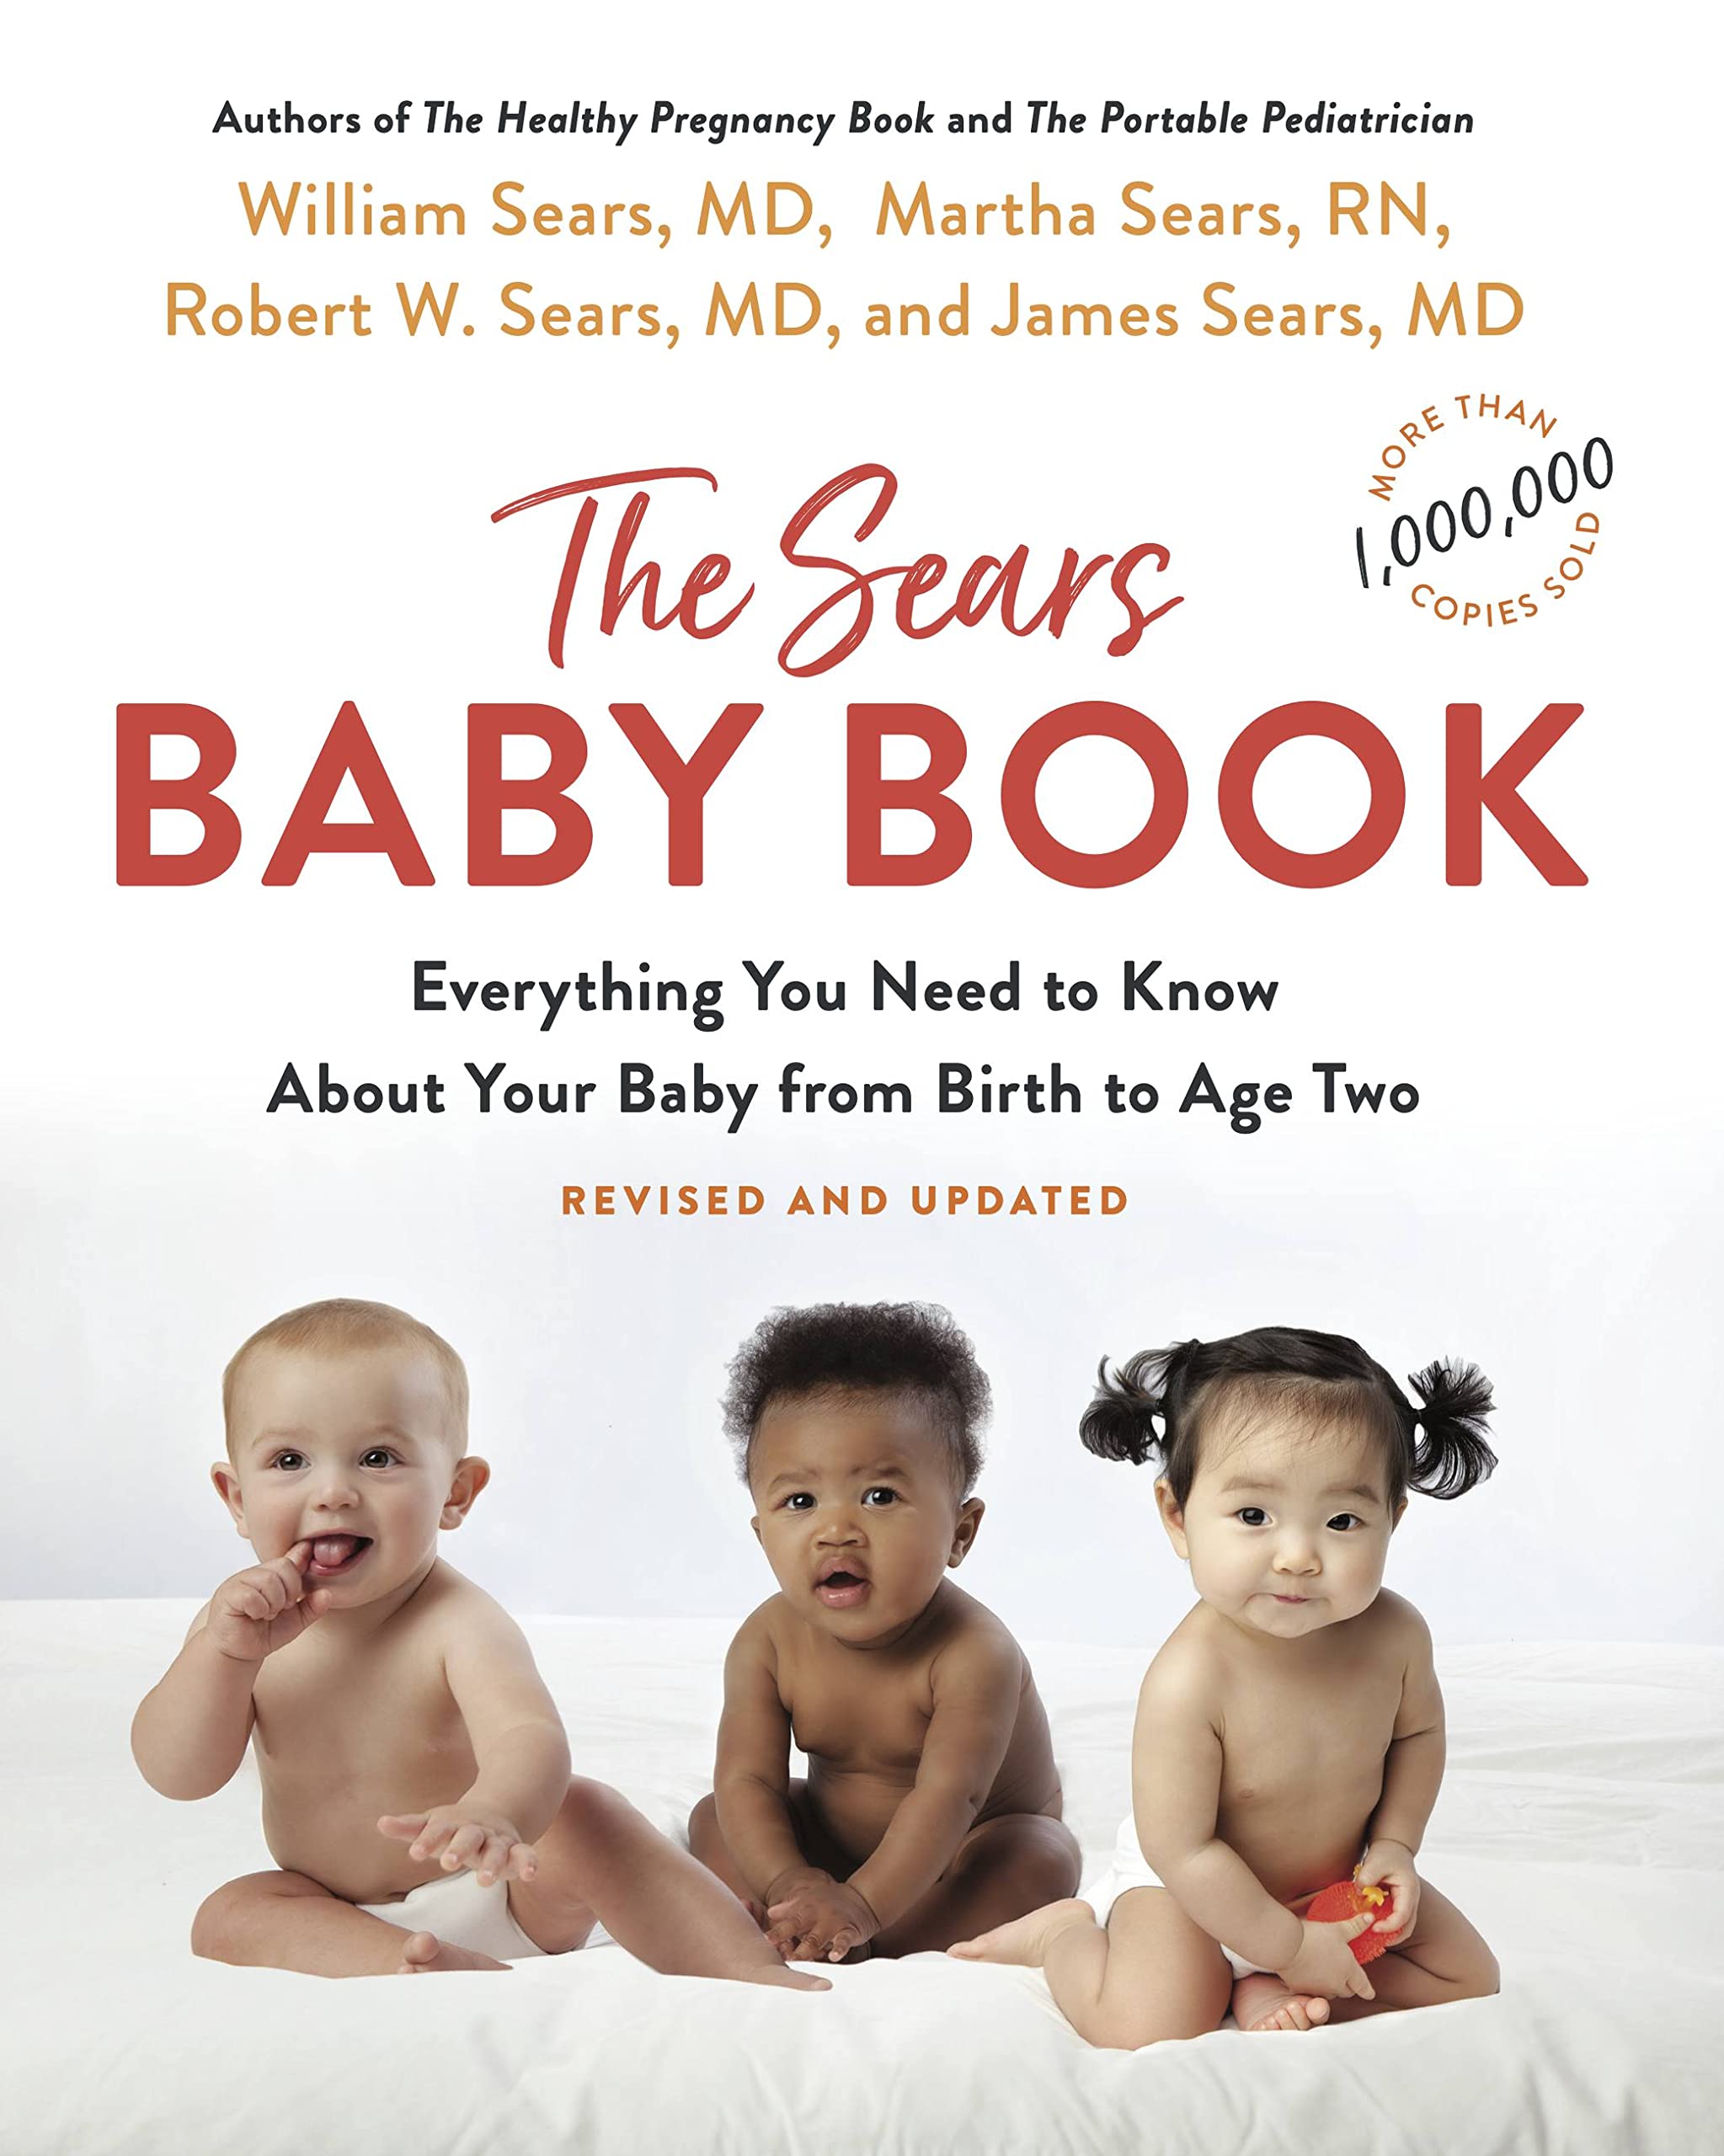 "The Sears Baby Book" by William Sears, M.D., Martha Sears, R.N., Robert W. Sears, M.D., and James Sears, M.D.